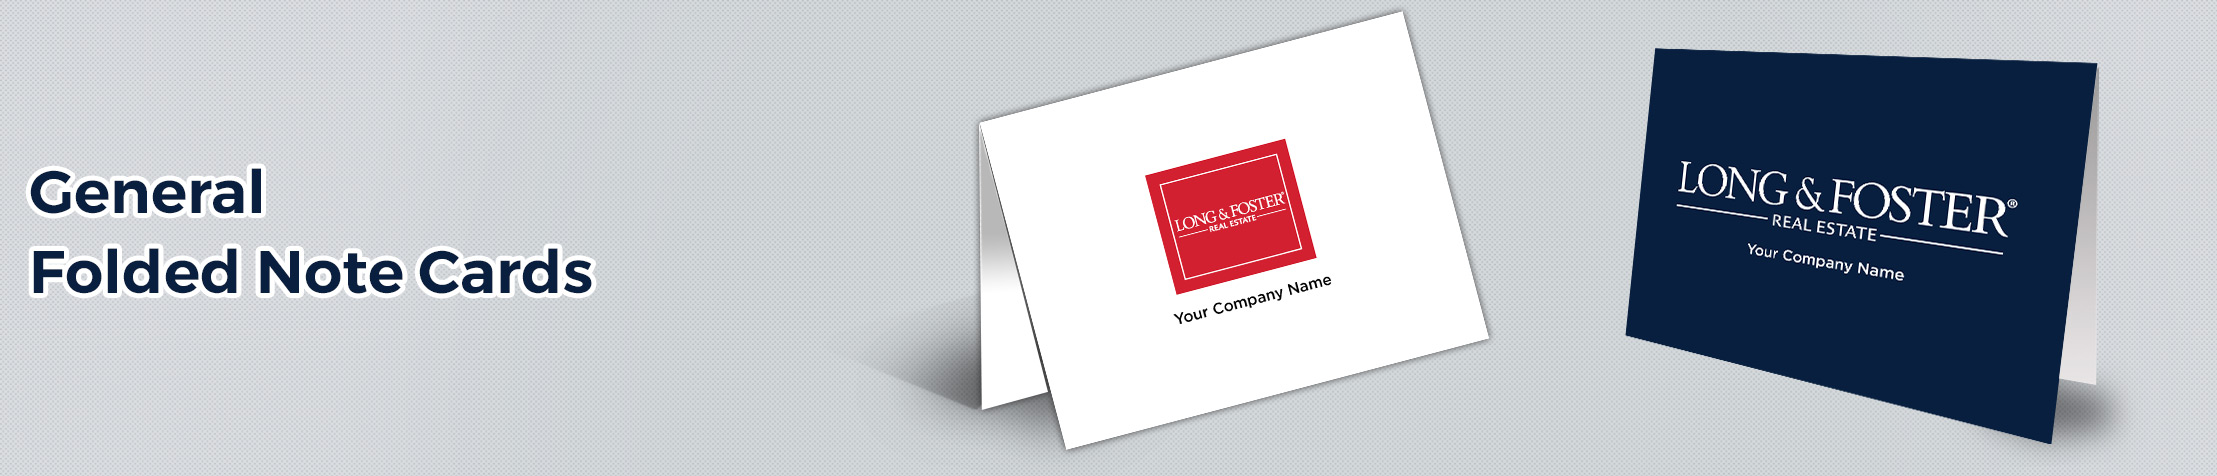 Long and Foster Real Estate Customizable Folded Note Cards - Long and Foster note card stationery | BestPrintBuy.com